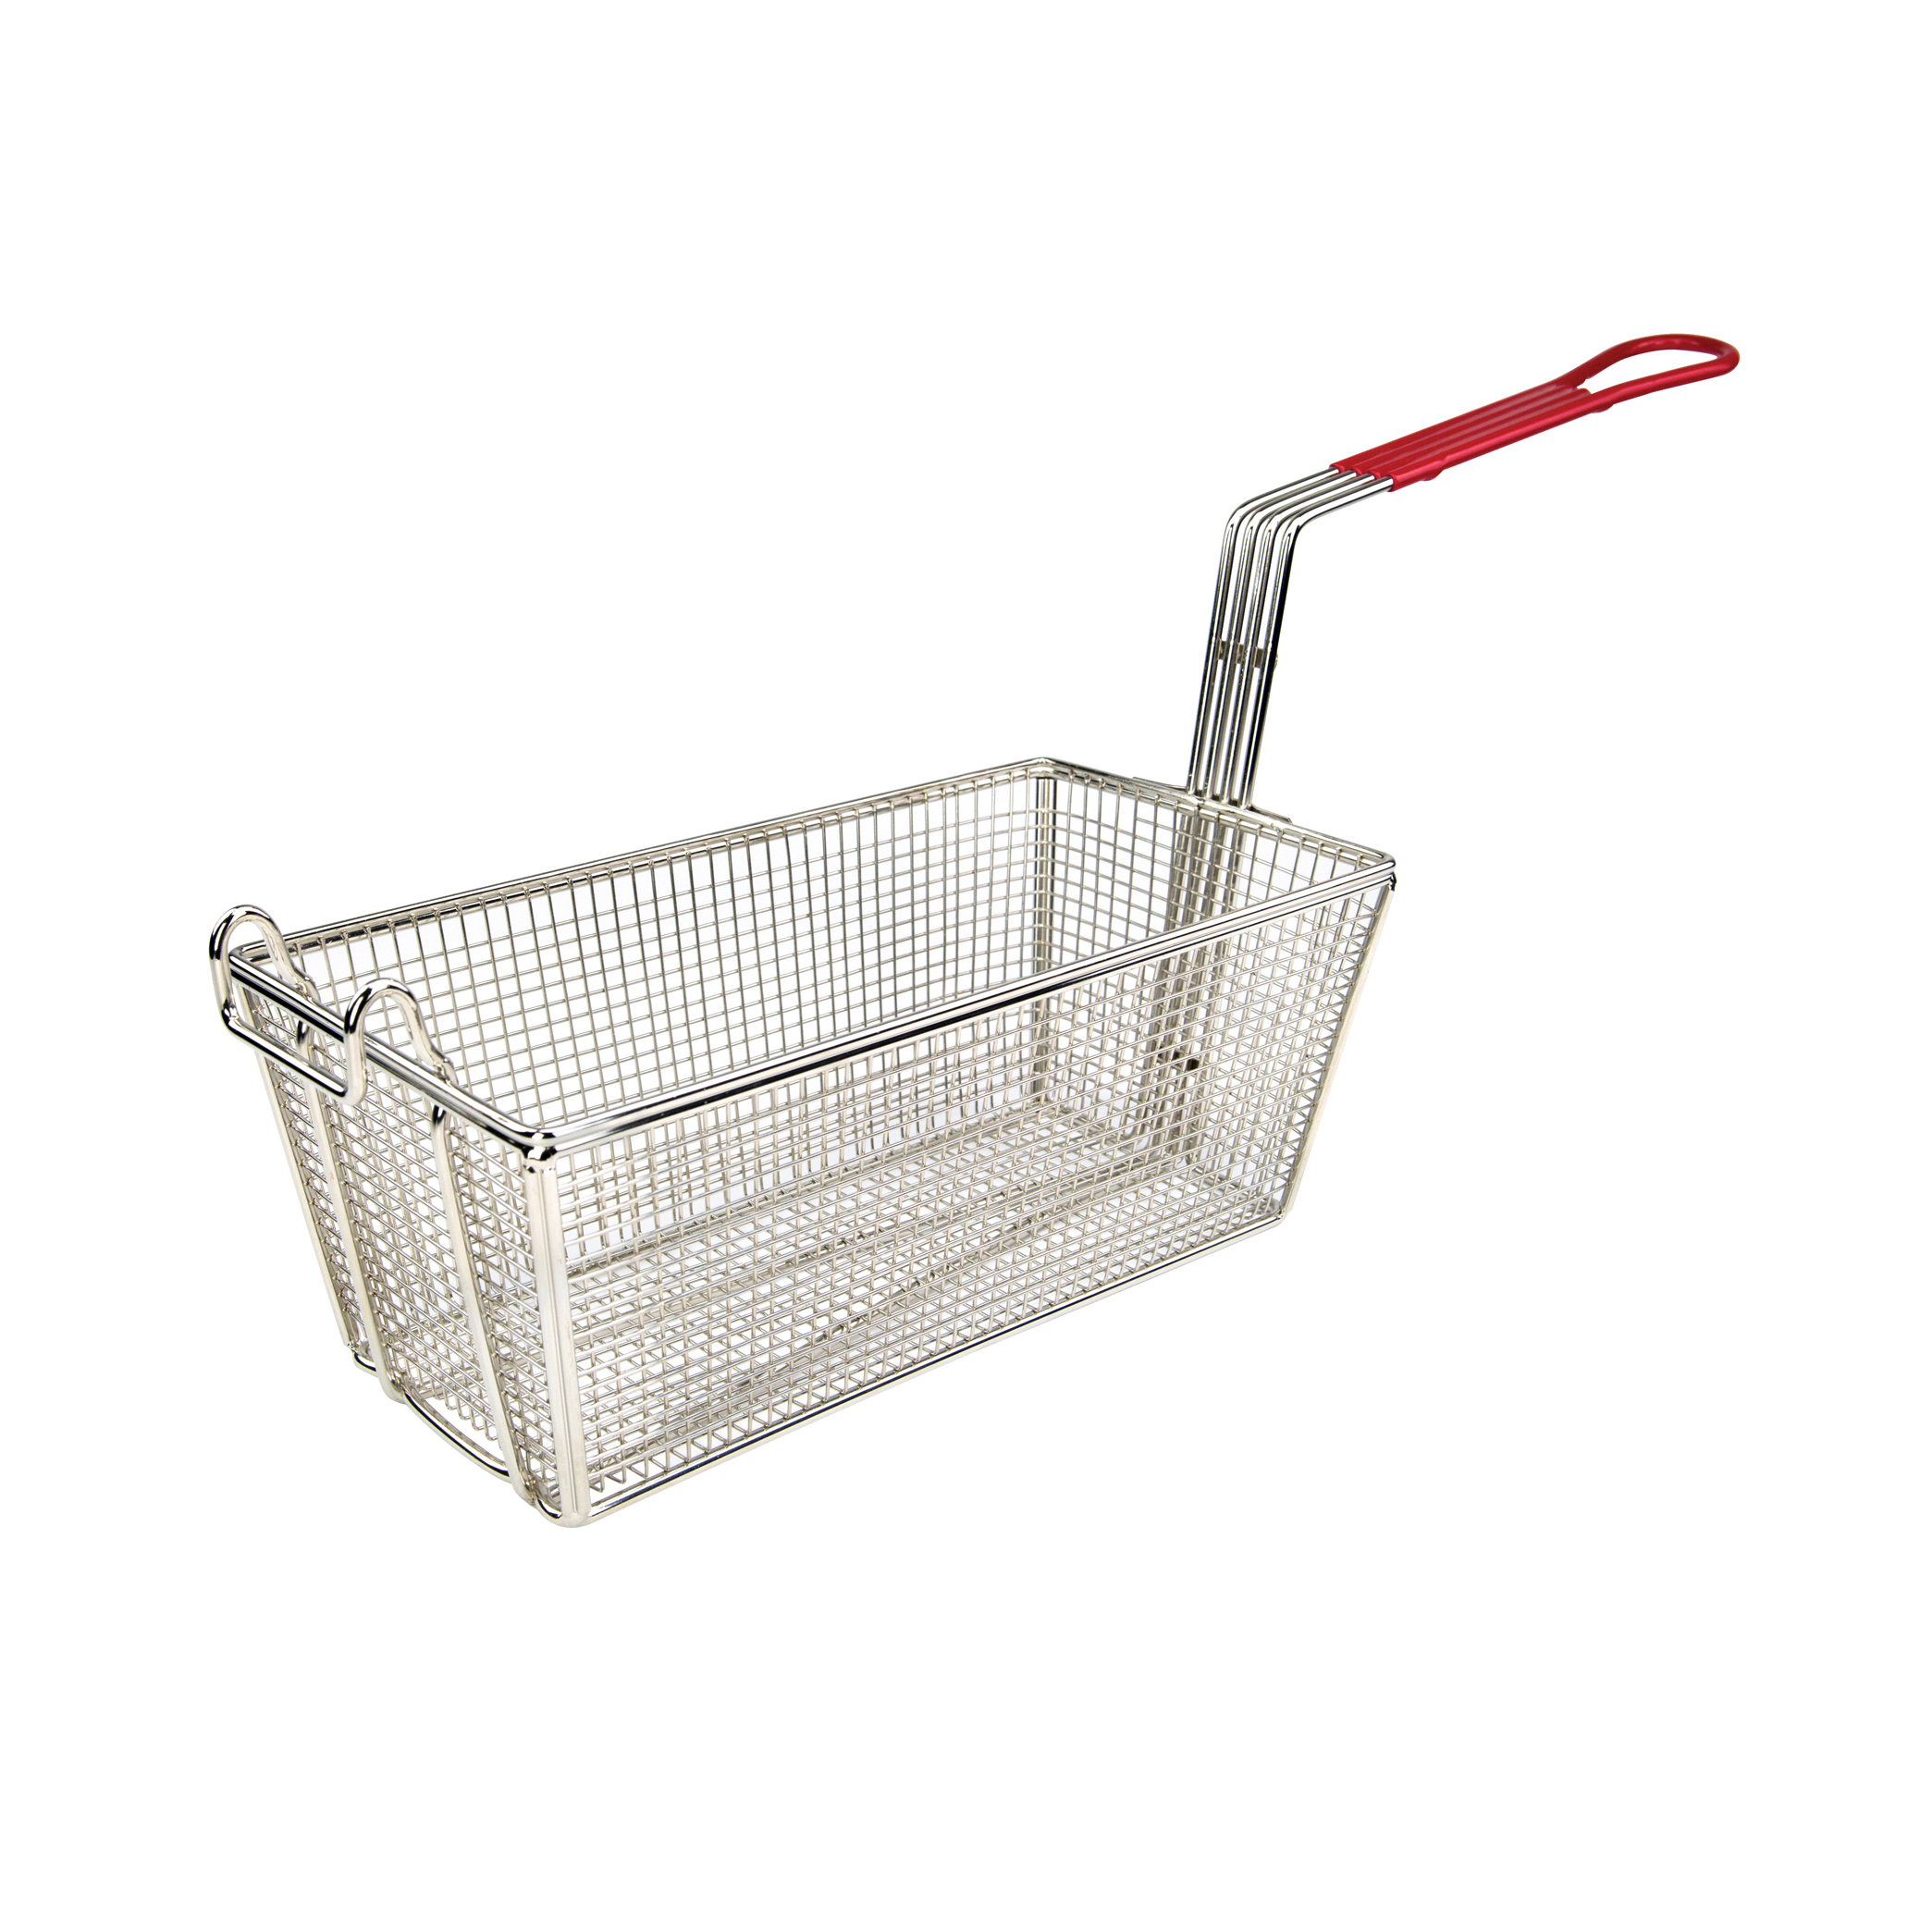 12X6X5 FRY BASKET RED HANDLE